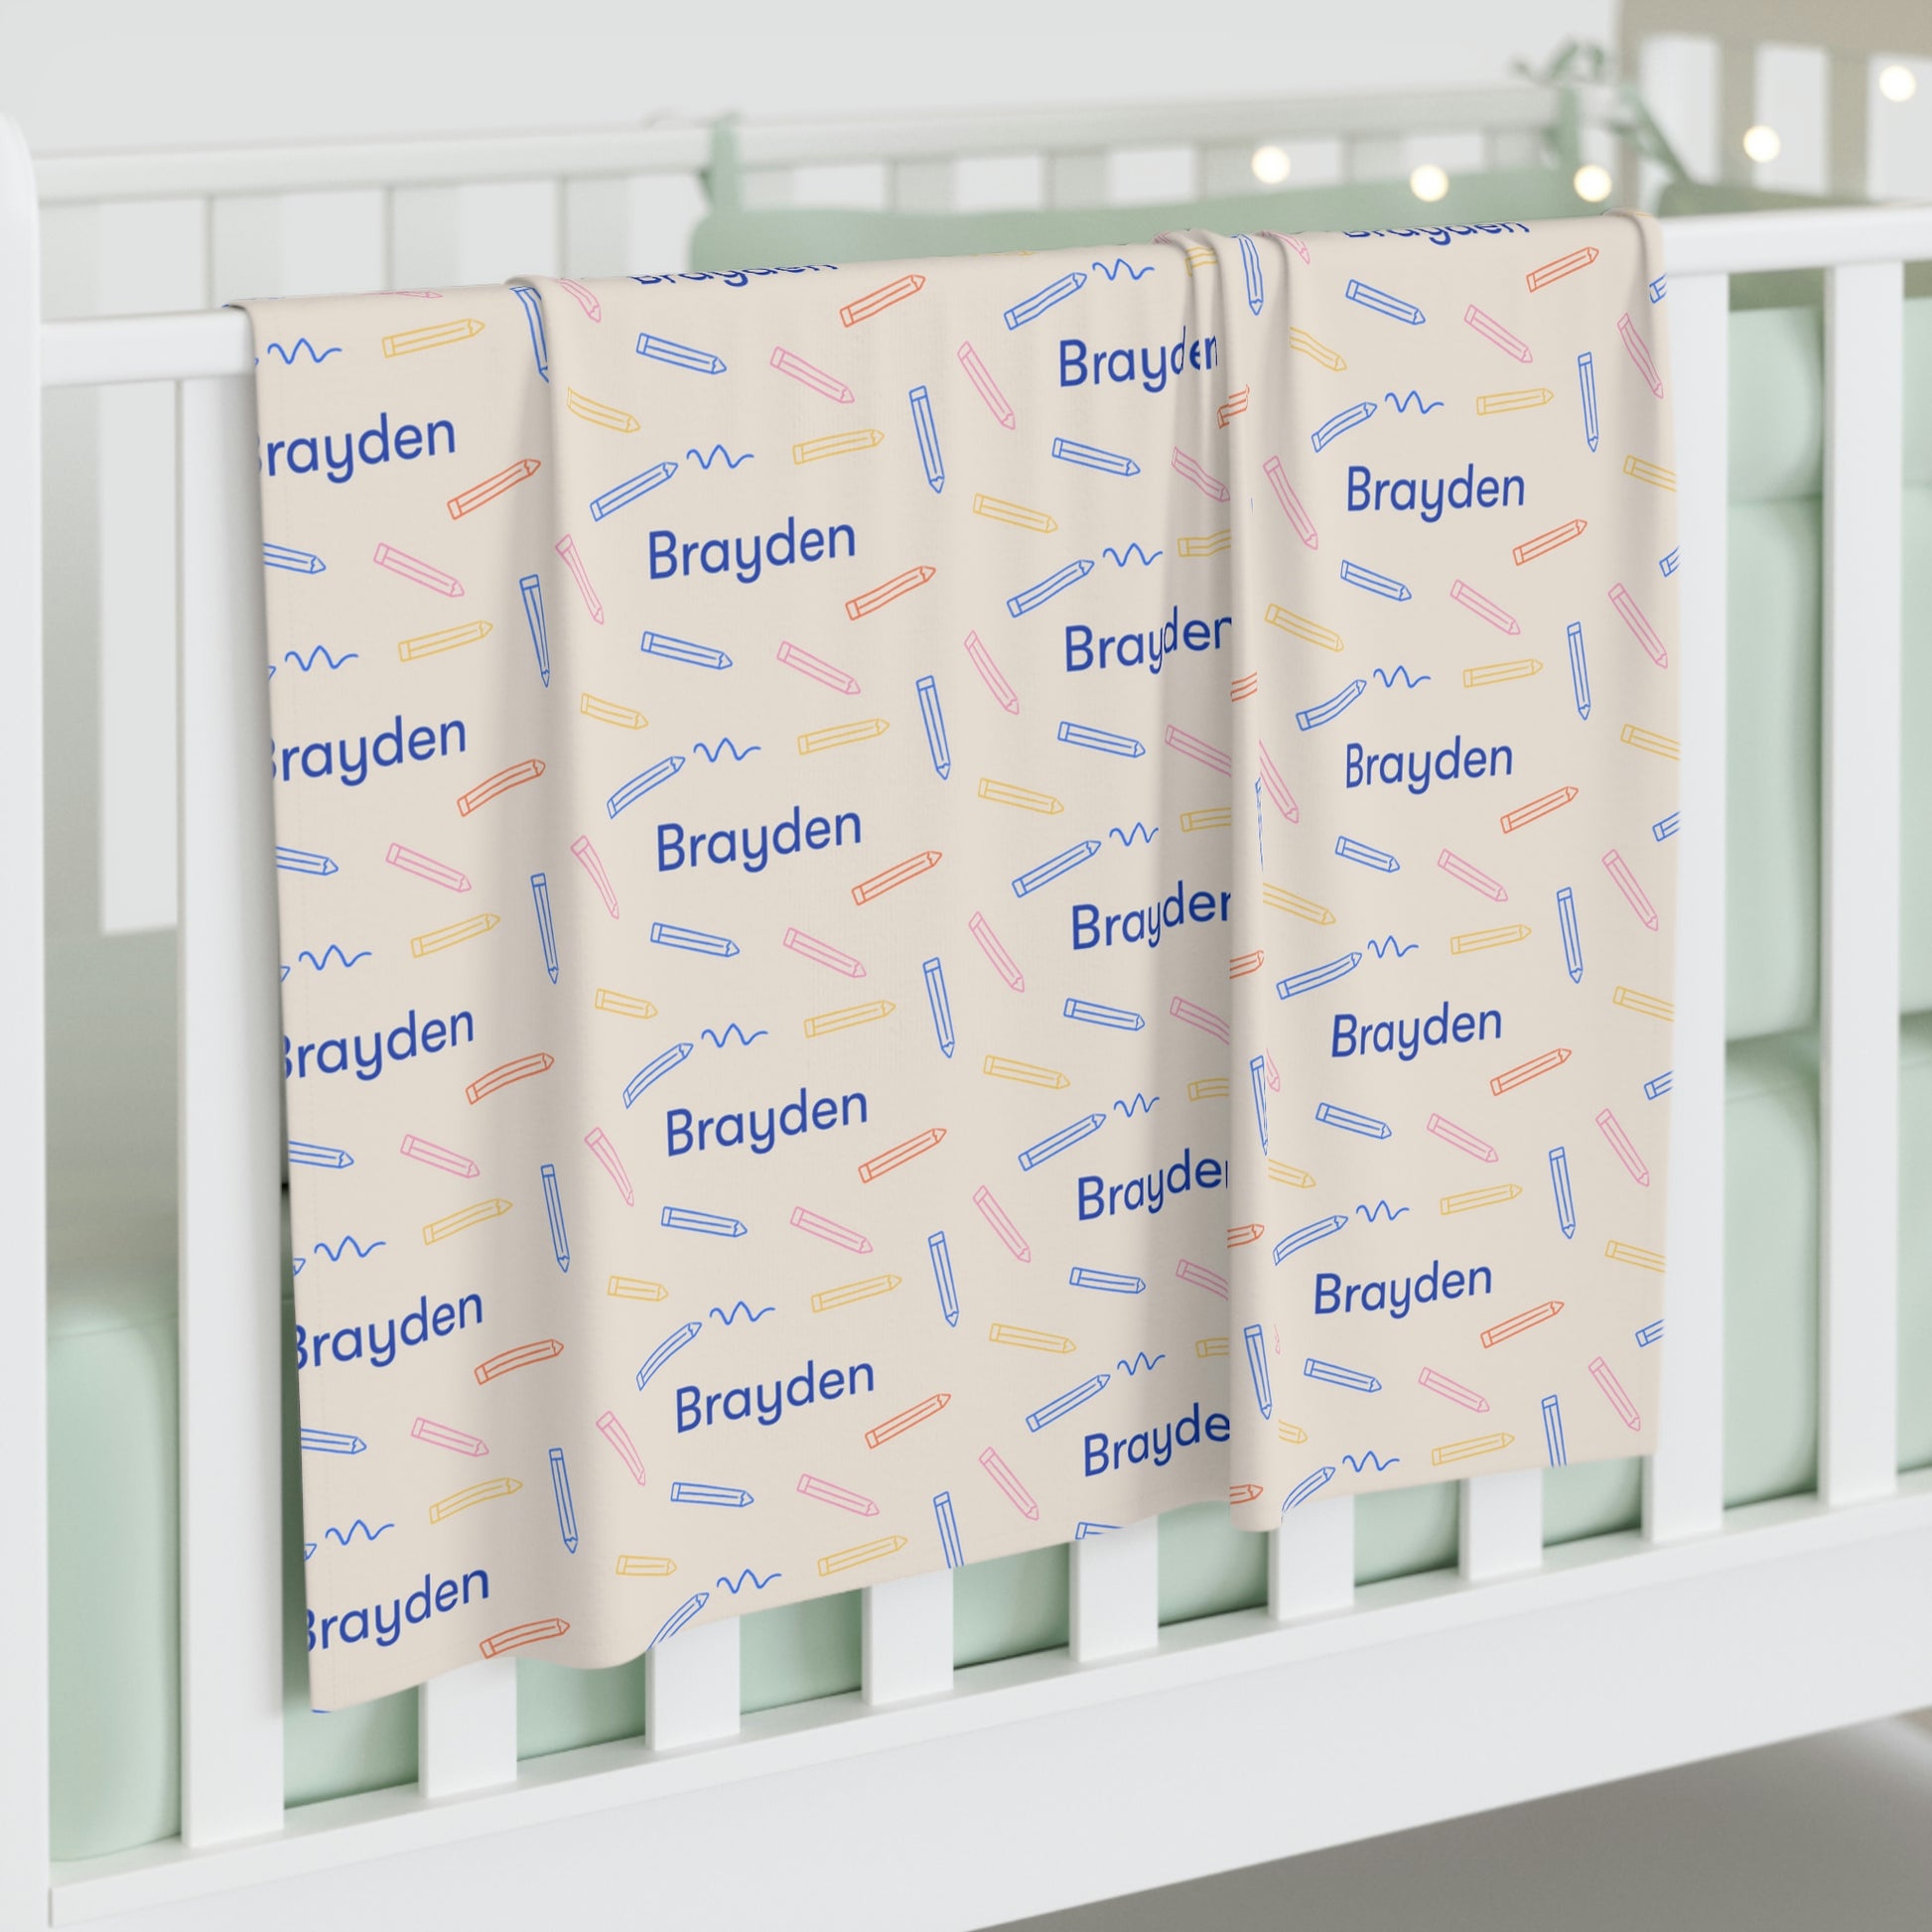 Jersey personalized baby blanket in colored pencil pattern hung over side of white crib